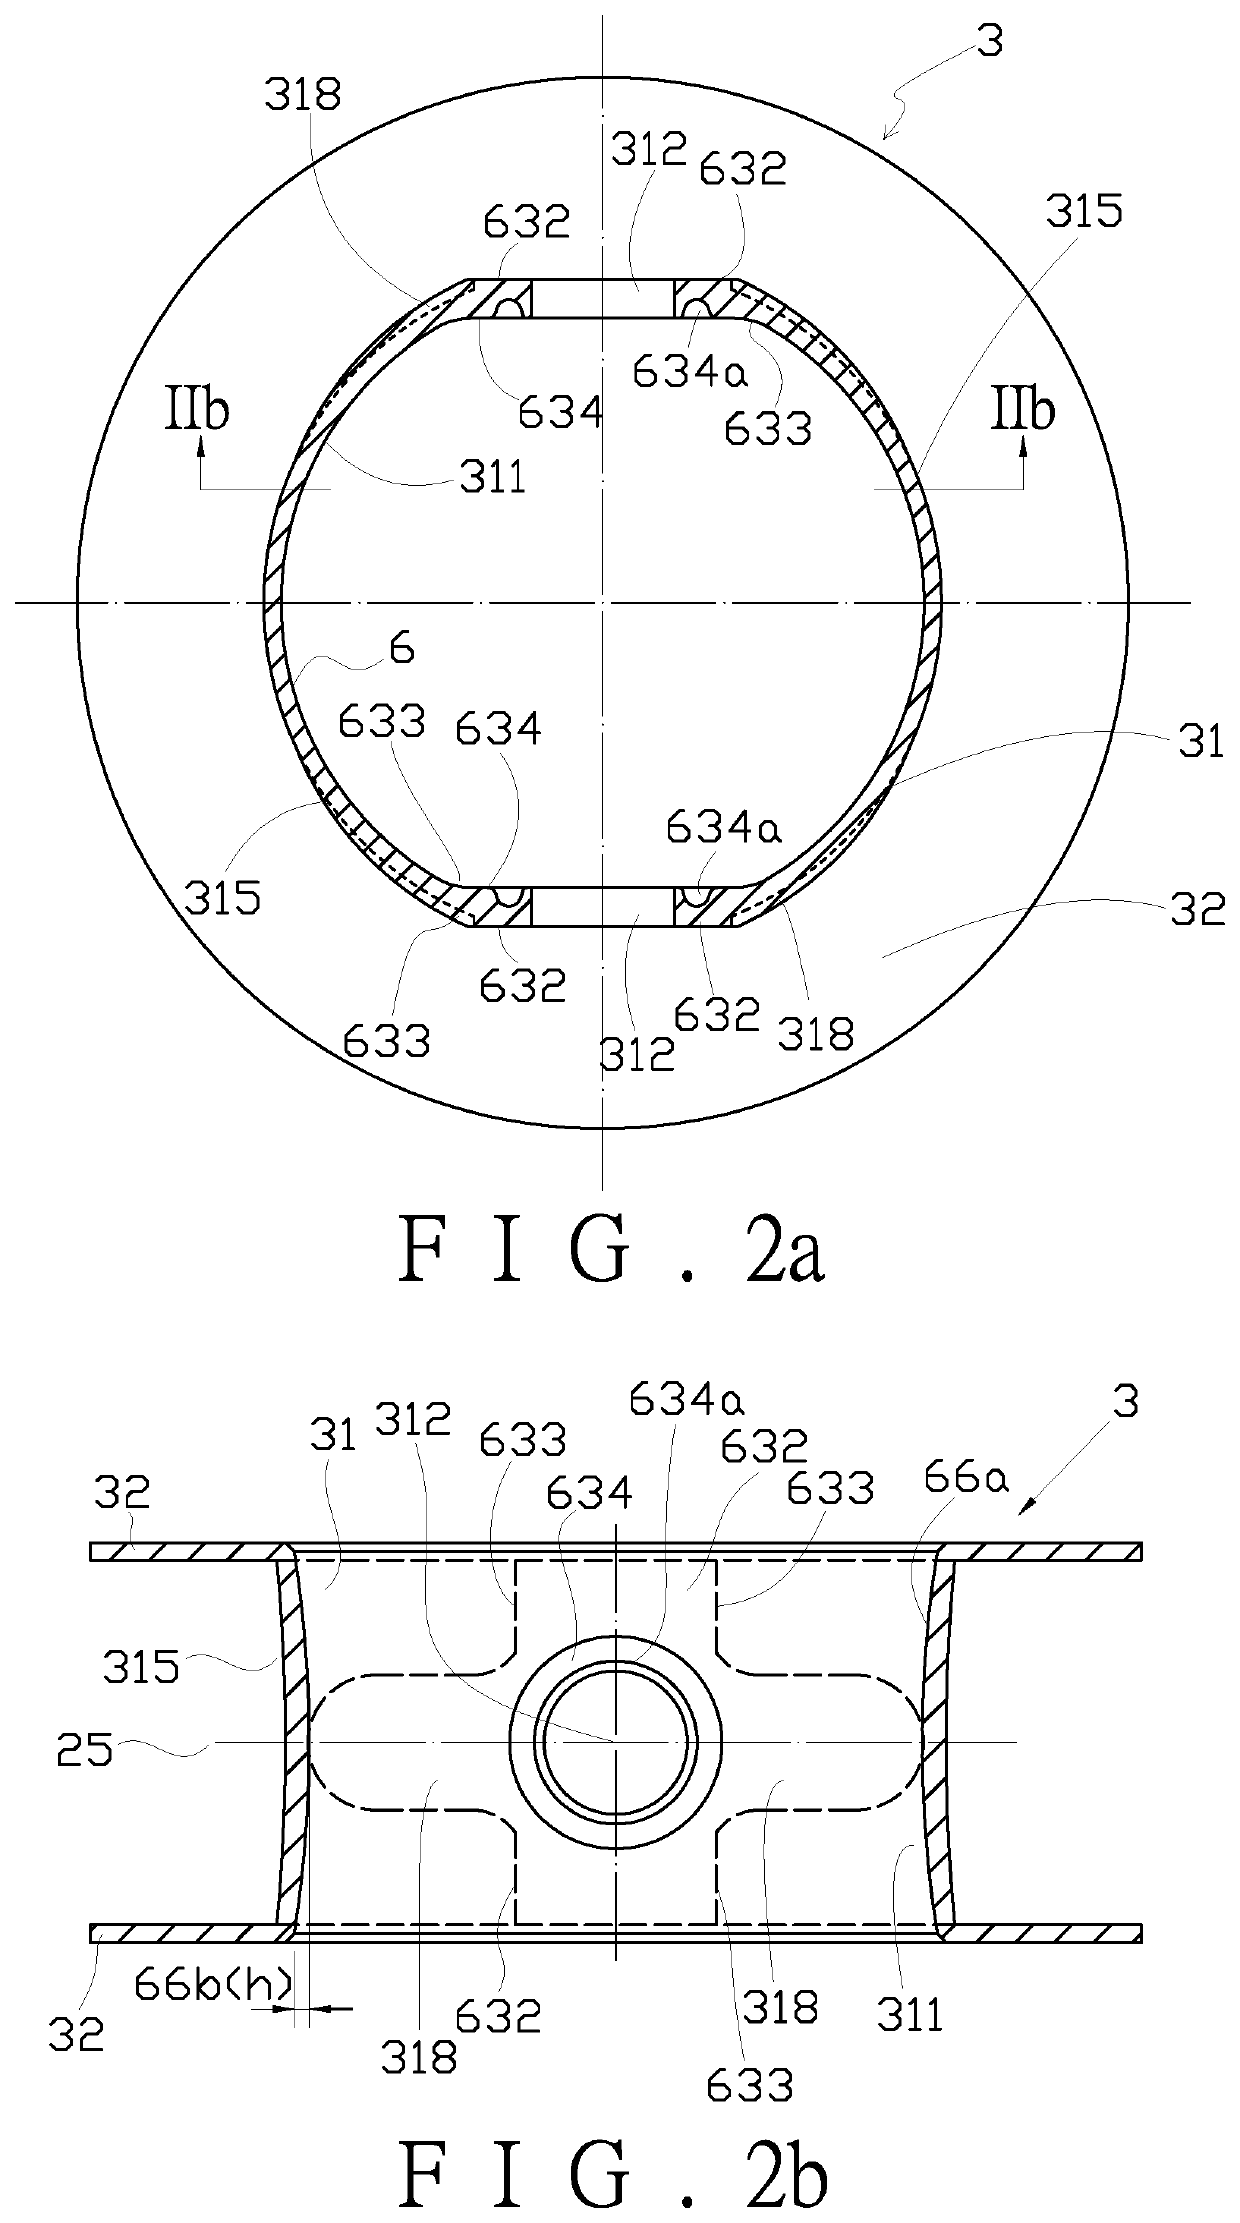 Fluoroplastic butterfly valve structure